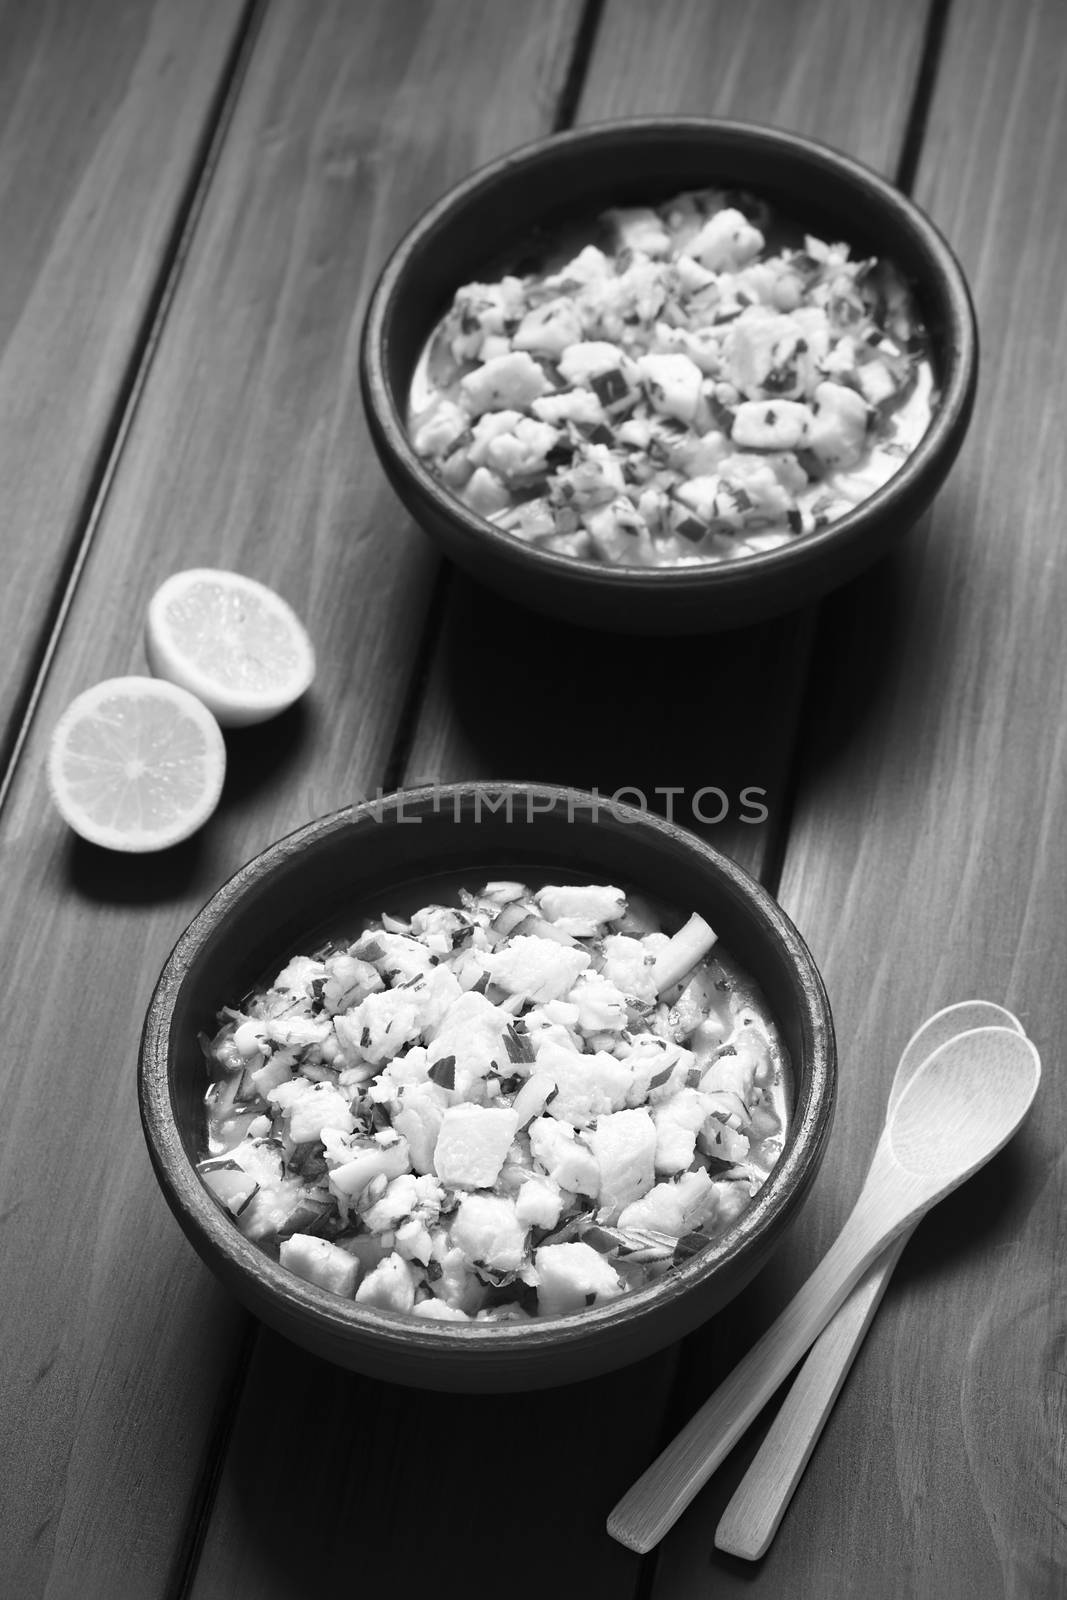 Chilean Ceviche made of Southern Ray's bream fish (lat. Brama Australis, Spanish Reineta), onion, garlic and cilantro marinated in lemon juice served in two rustic bowls. Photographed on dark wood with natural light (Selective Focus, Focus in the middle of the first ceviche) (Monochrome Image)